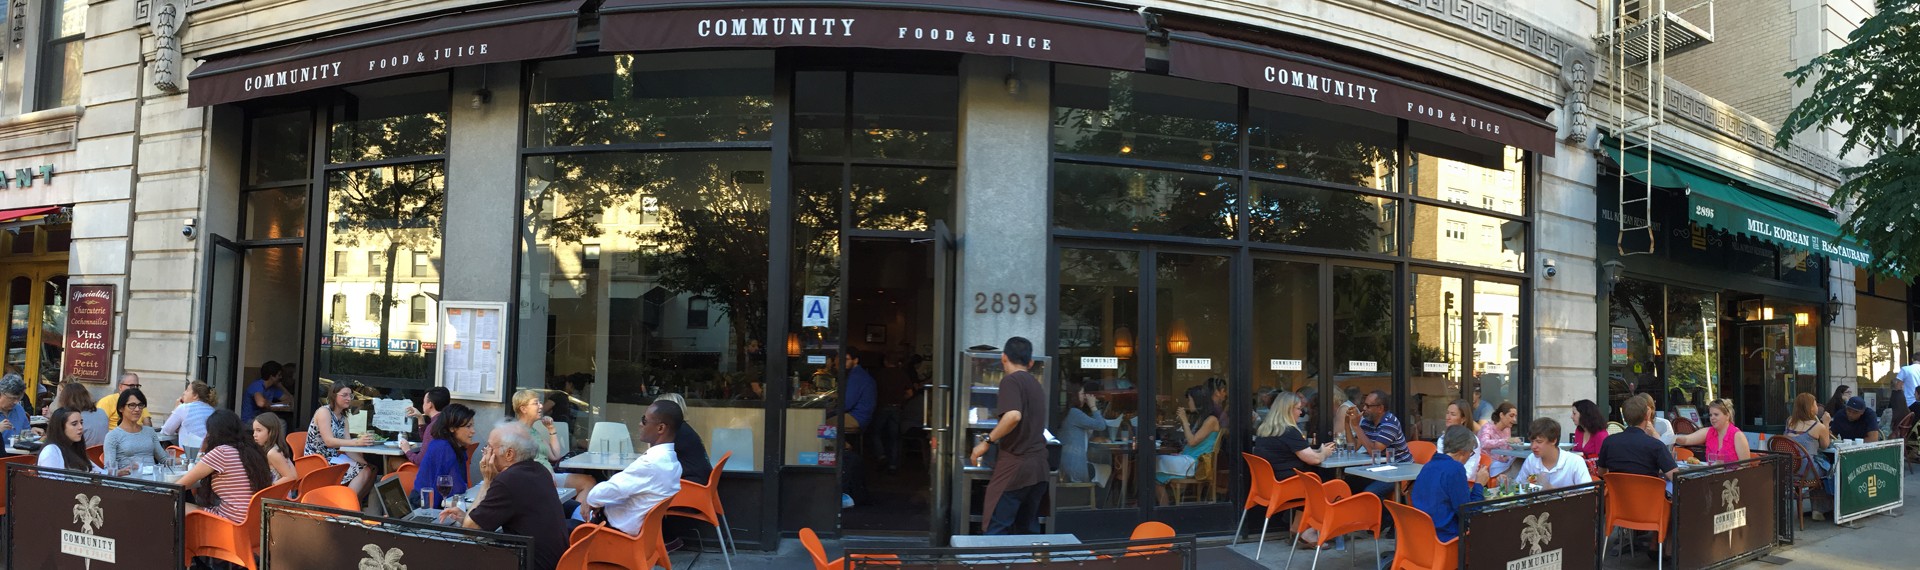 Patrons sitting outside at Community Food & Juce 